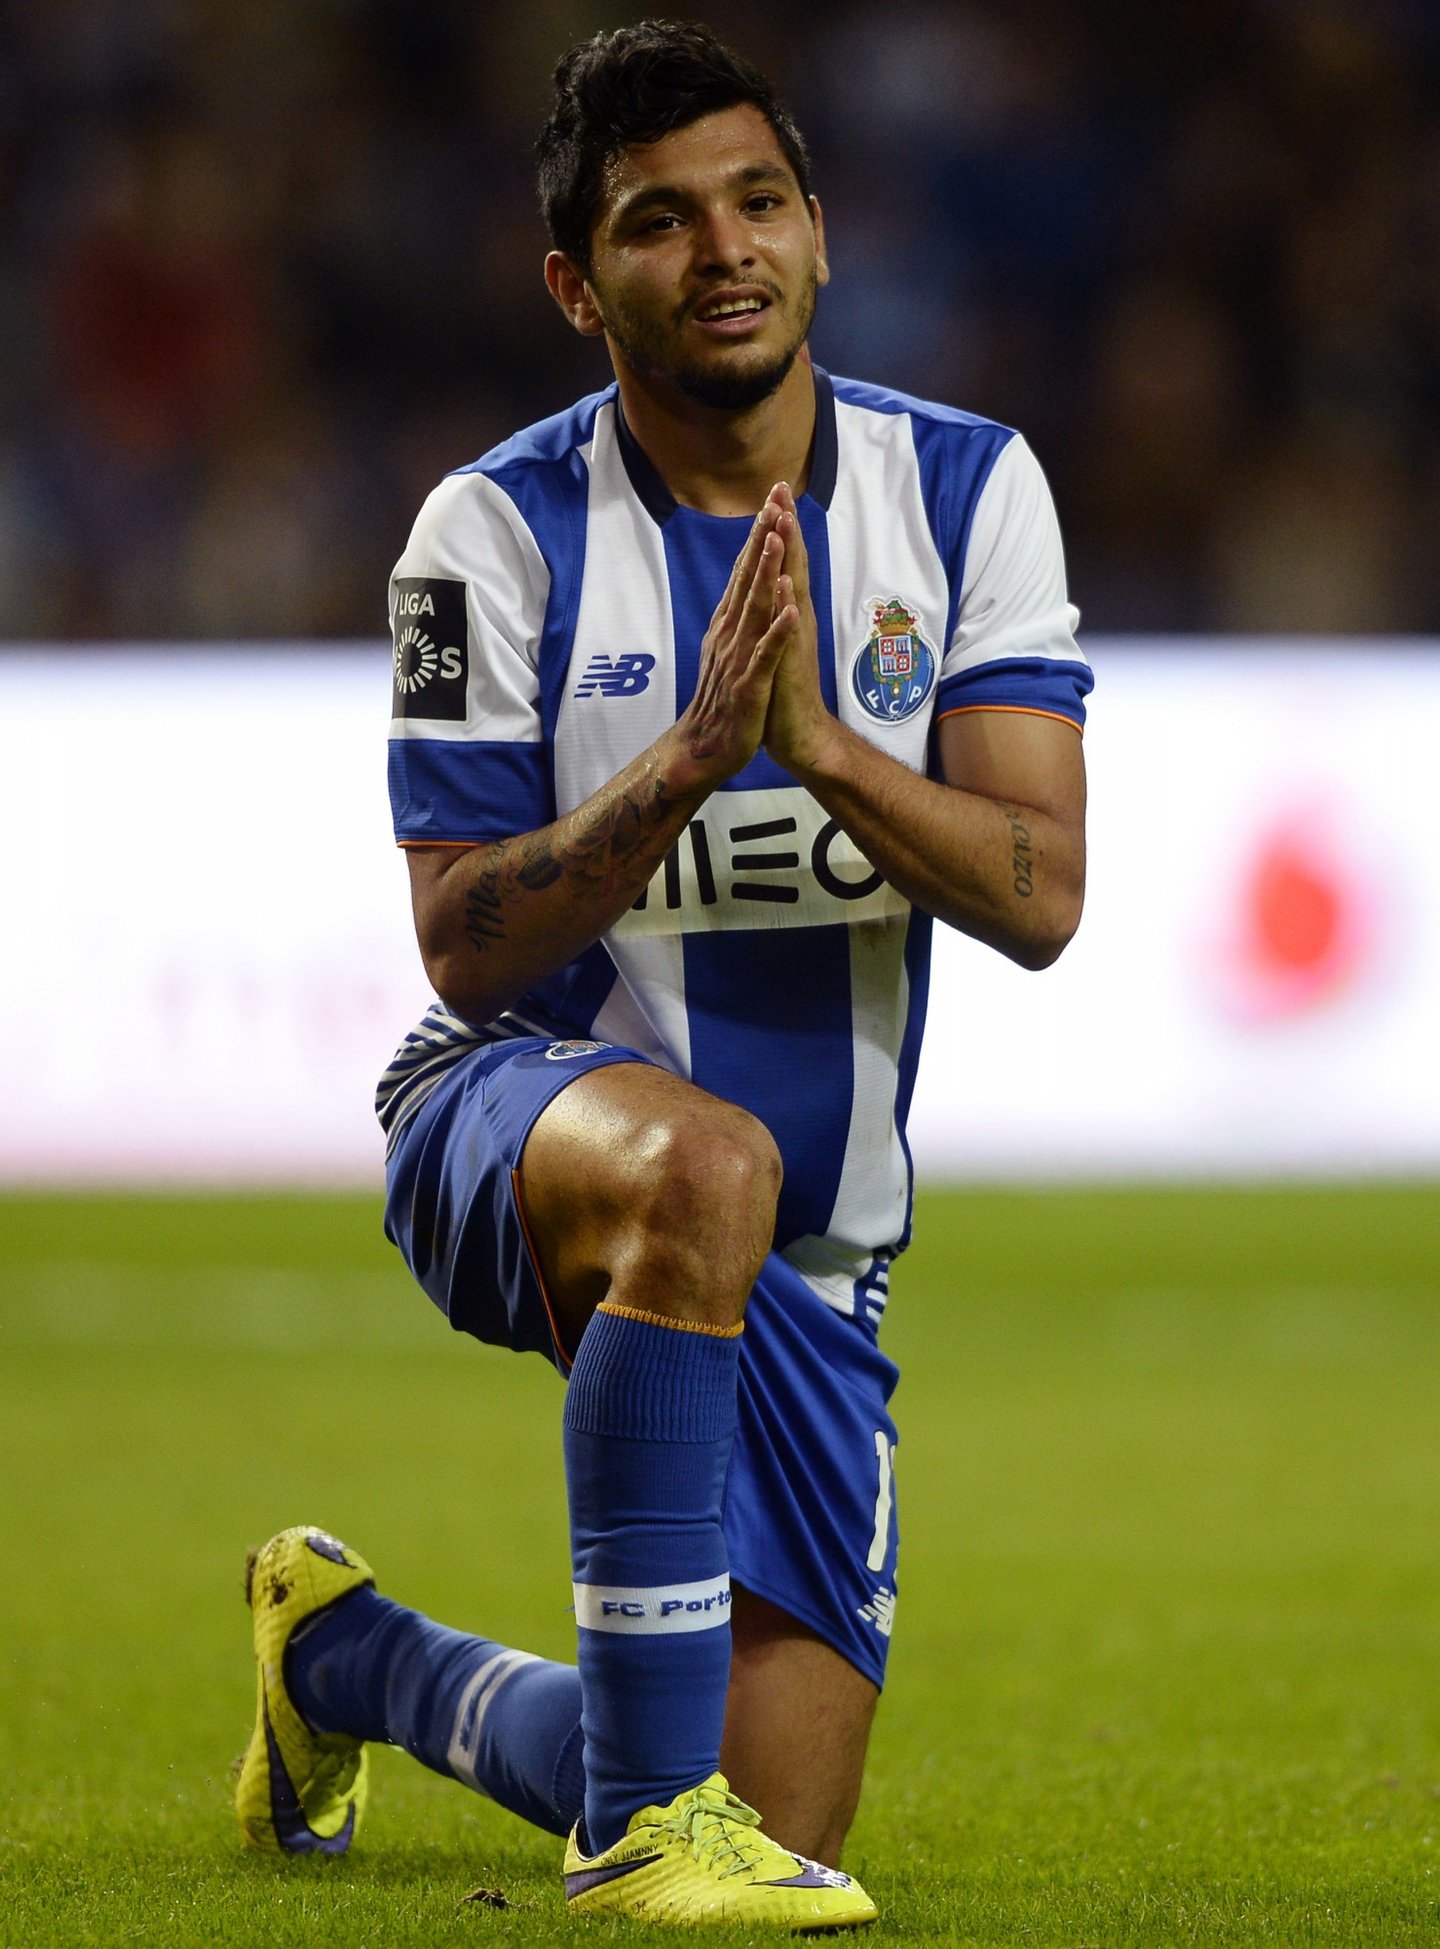 Porto's Mexican forward Jesus Corona gestures after missing a chance to score a goal during the Portuguese league football match FC Porto vs CS Maritimo at the Dragao stadium in Porto on January 24, 2016. AFP PHOTO / MIGUEL RIOPA / AFP / MIGUEL RIOPA (Photo credit should read MIGUEL RIOPA/AFP/Getty Images)